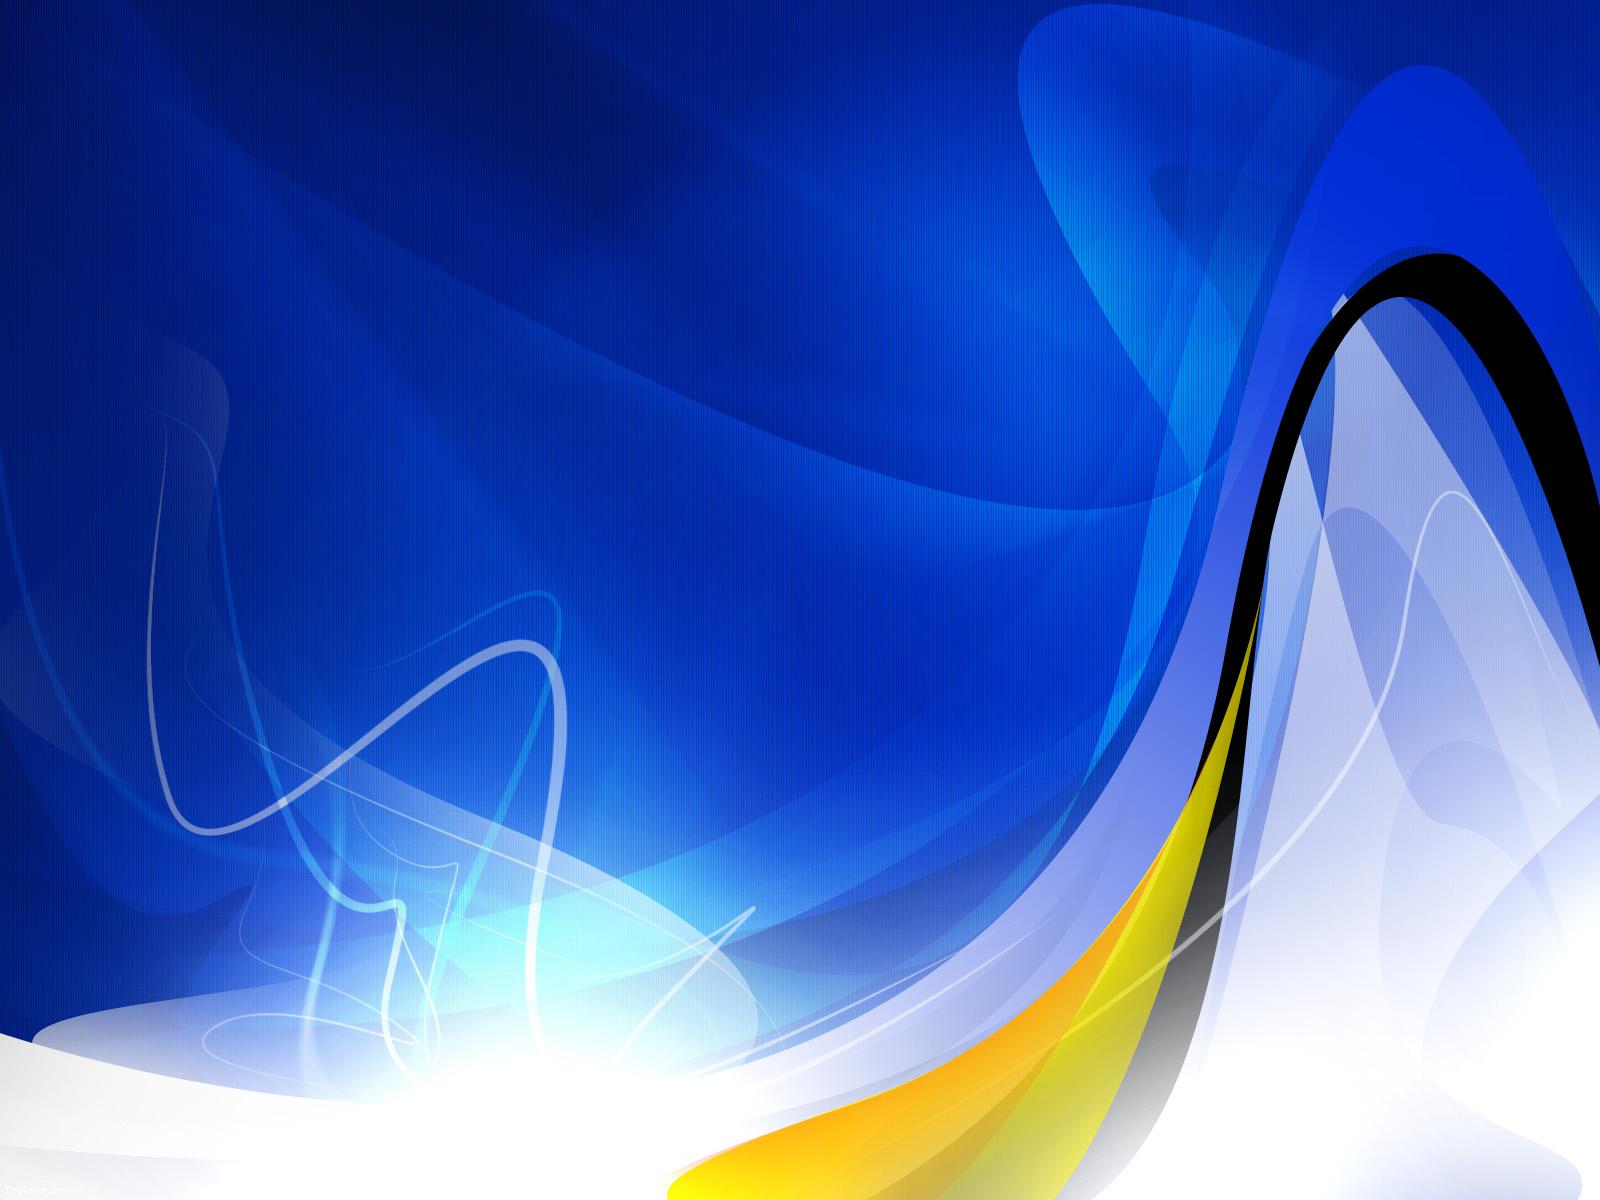 Forum Spreading Colors HD Abstract Wallpaper For Widescreen